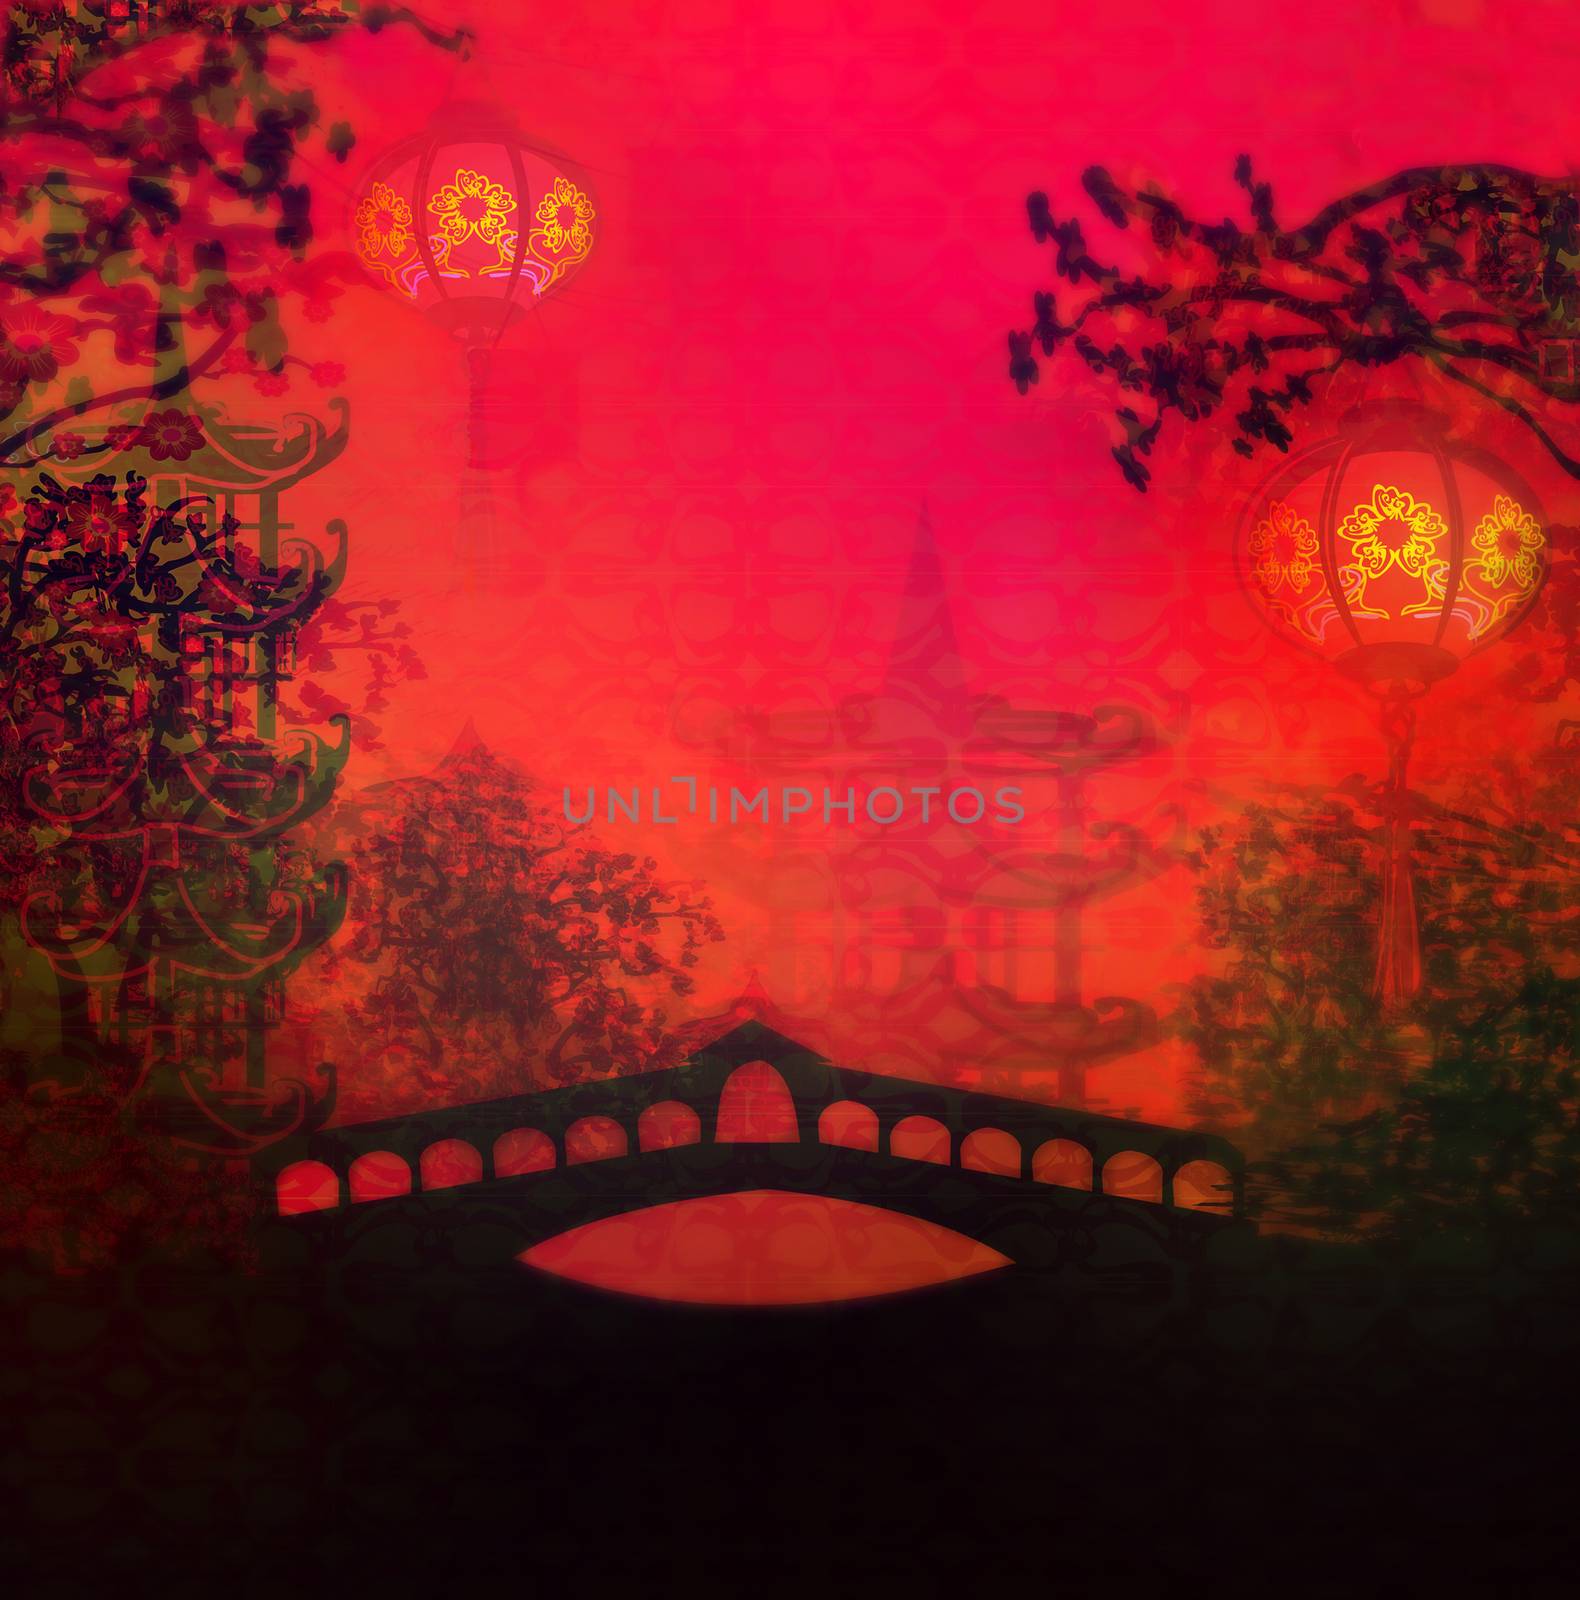 Mid-Autumn Festival for Chinese New Year - card by JackyBrown